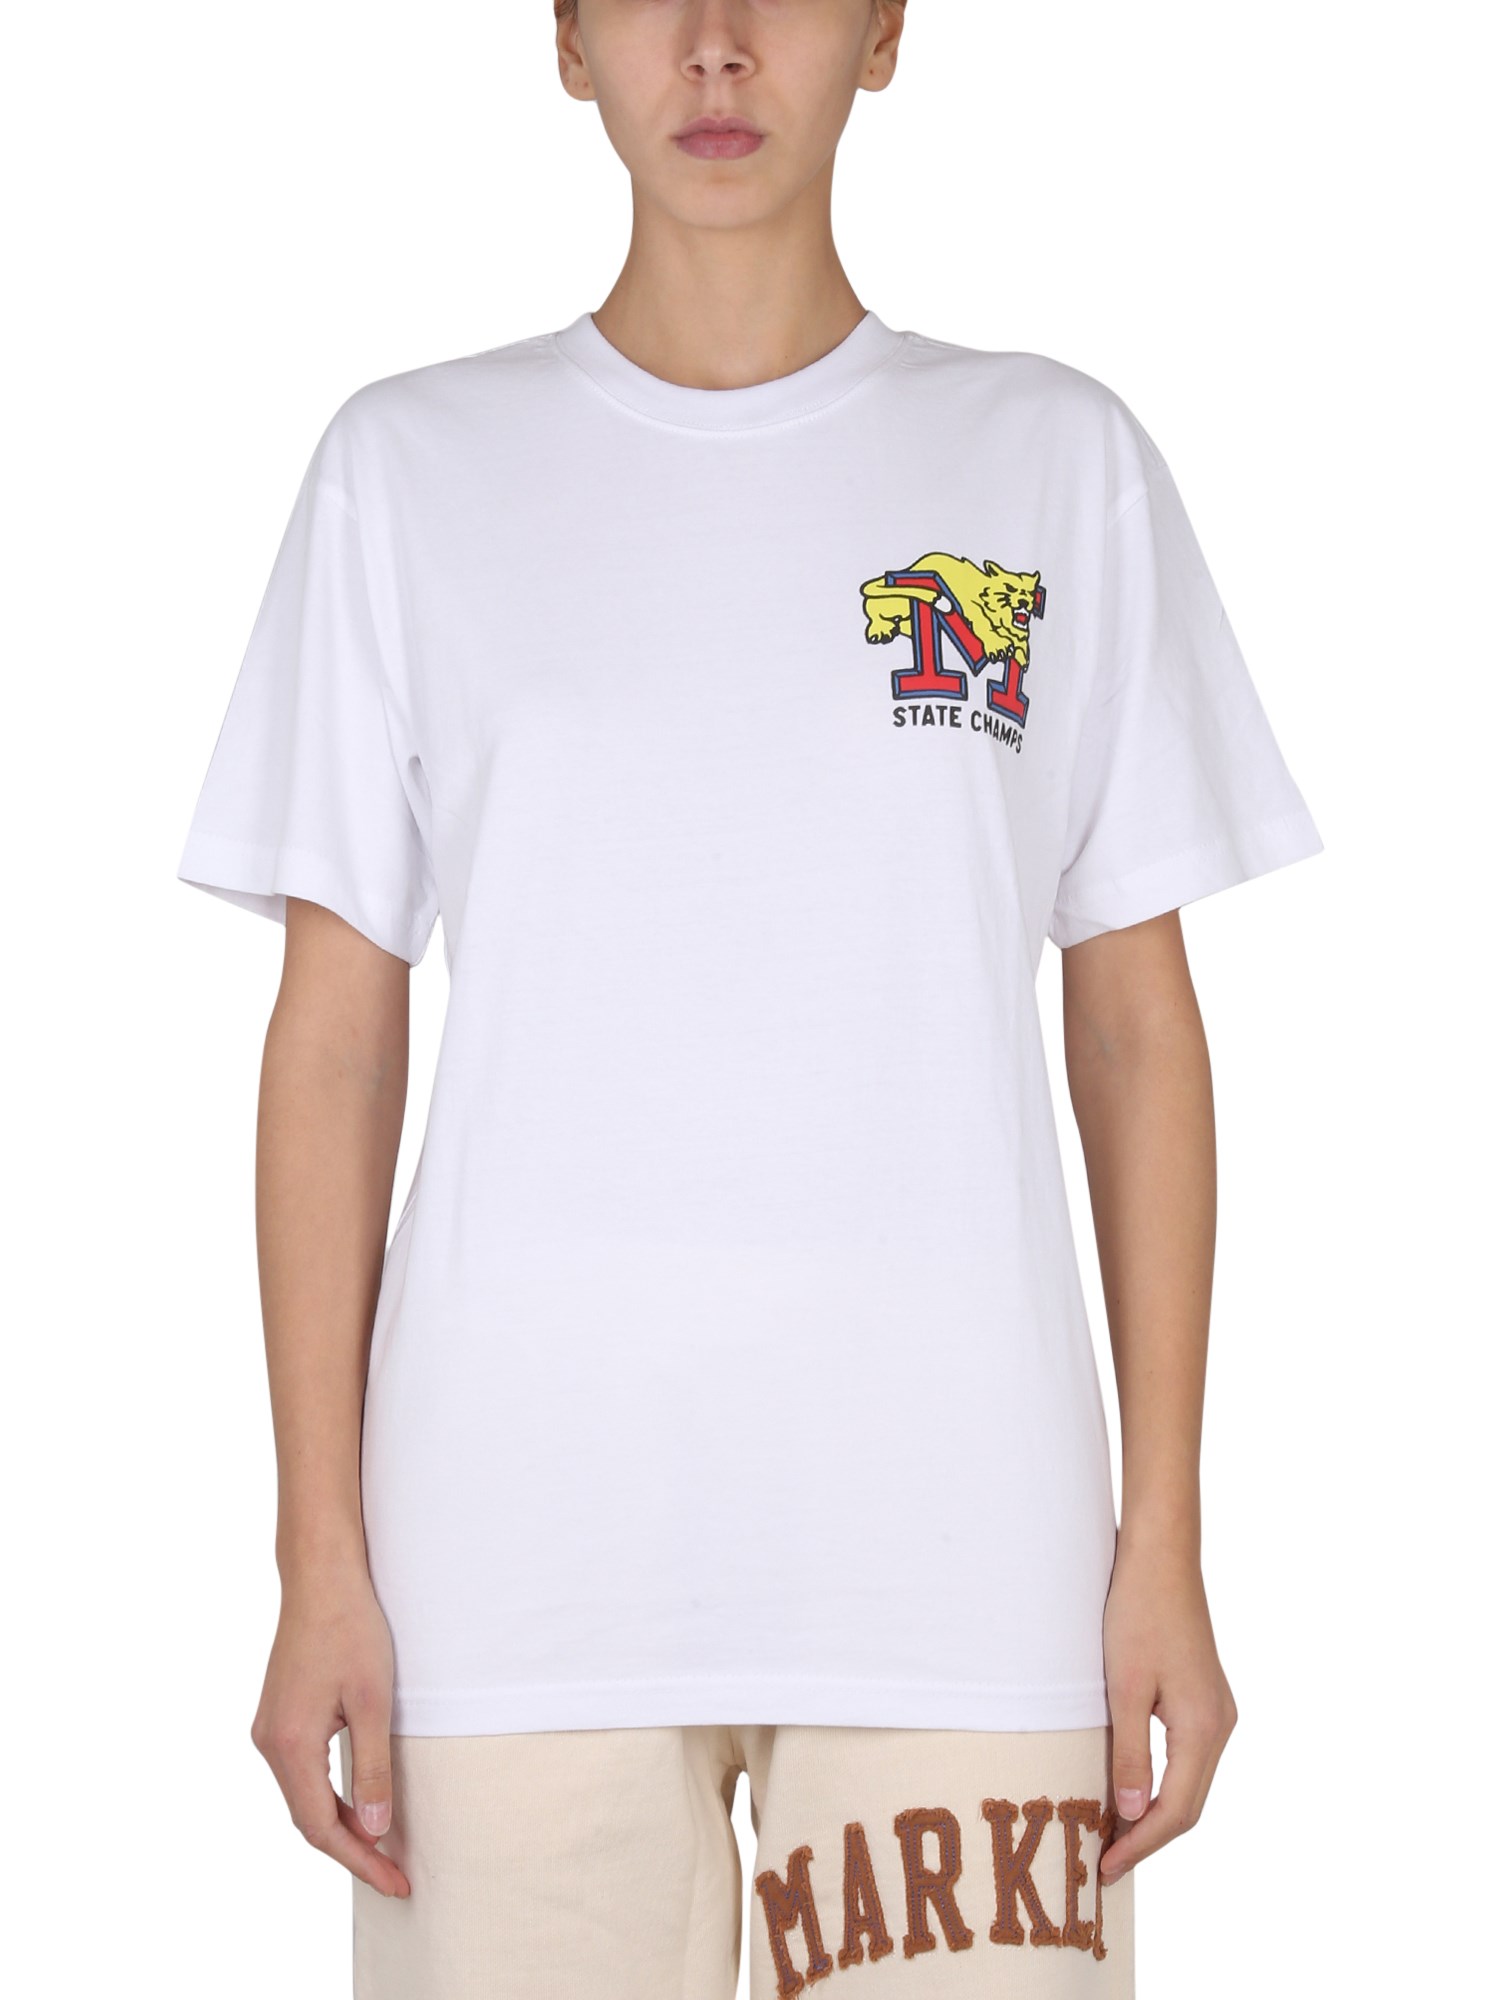 Market T-shirt State Champs In White